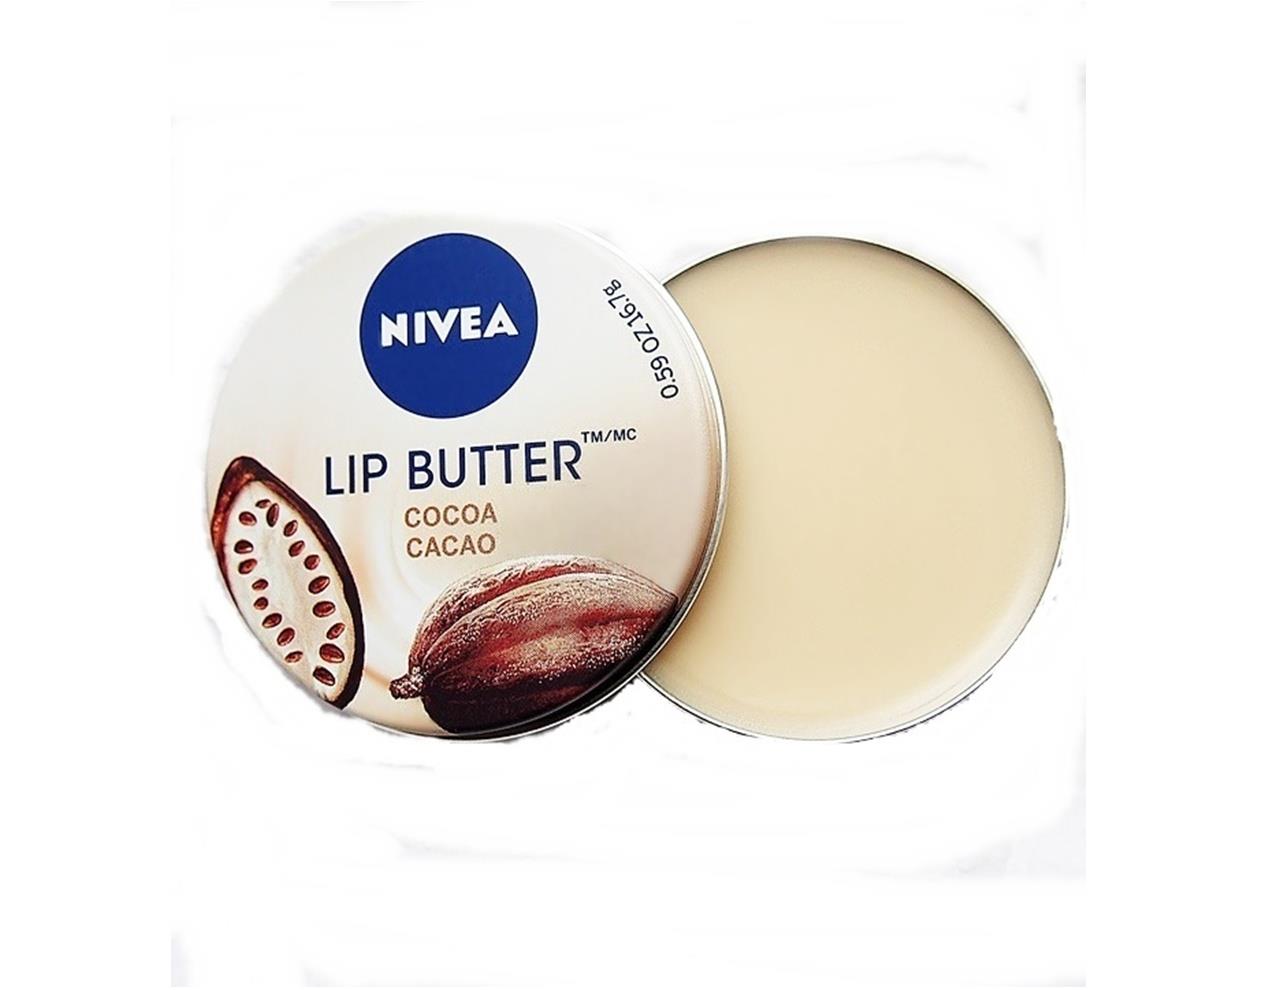 Nivea Lip Butter Lip Balm For Dry/Cracked Lips 0.6oz 19ml - Different ...